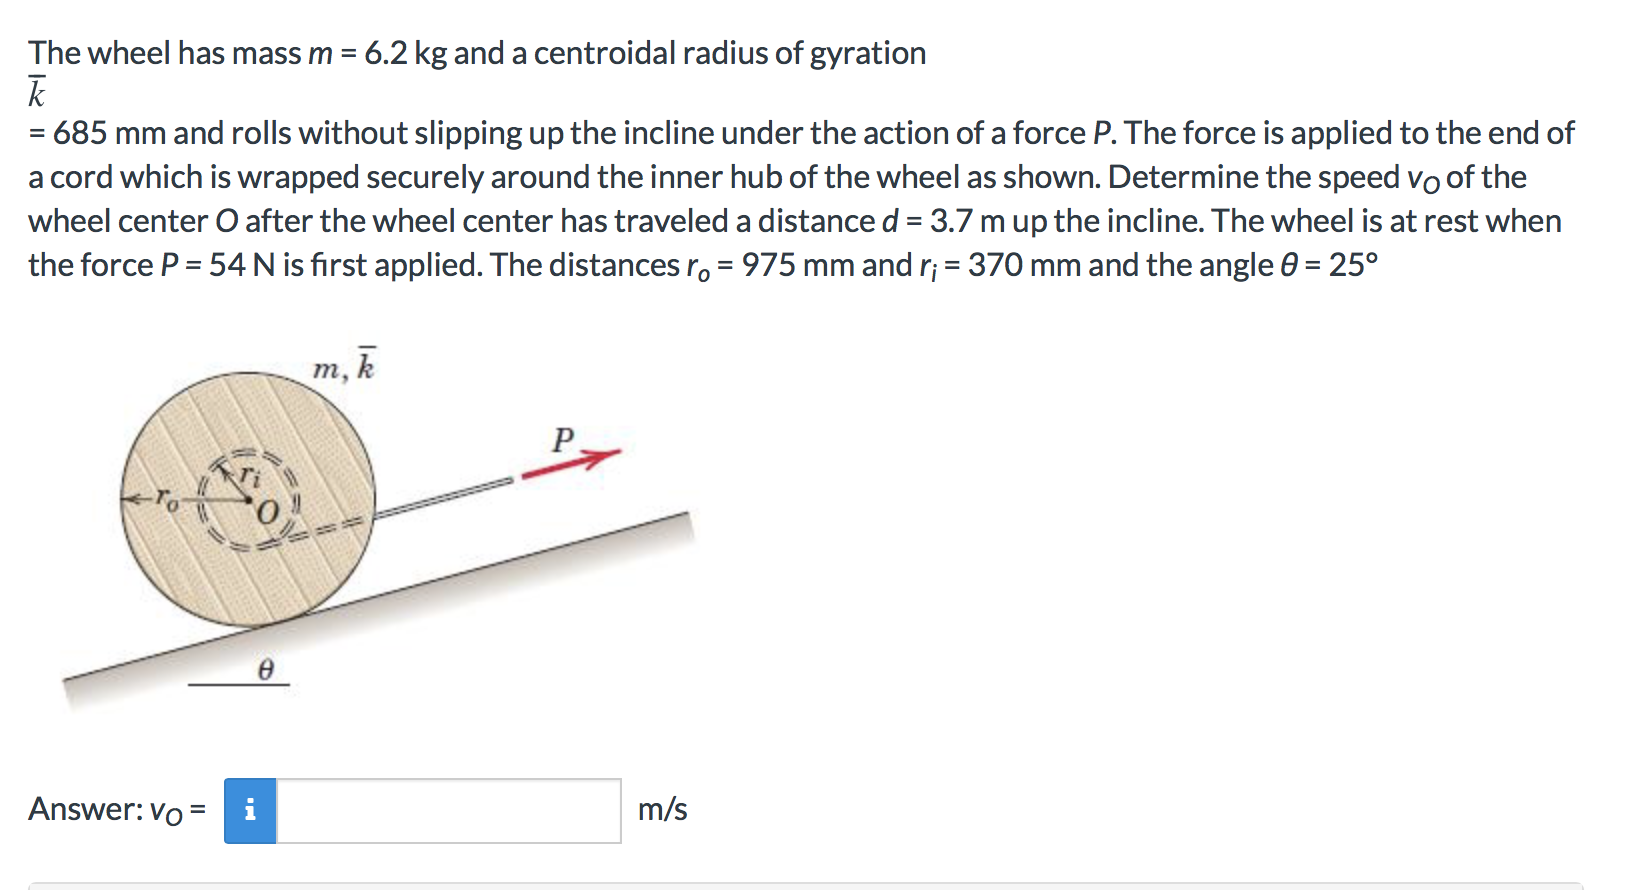 The wheel has mass m 6.2 kg and a centroidal radius of gyration
685 mm and rolls without slipping up the incline under the action of a force P. The force is applied to the end of
a cord which is wrapped securely around the inner hub of the wheel as shown. Determine the speed vo Oof the
wheel center O after the wheel center has traveled a distance d 3.7 m up the incline. The wheel is at rest when
975 mm and ri 370 mm and the angle 0 = 25°
the force P 54 N is first applied. The distances ro
m, k
P
m/s
Answer: Vo
=
O
